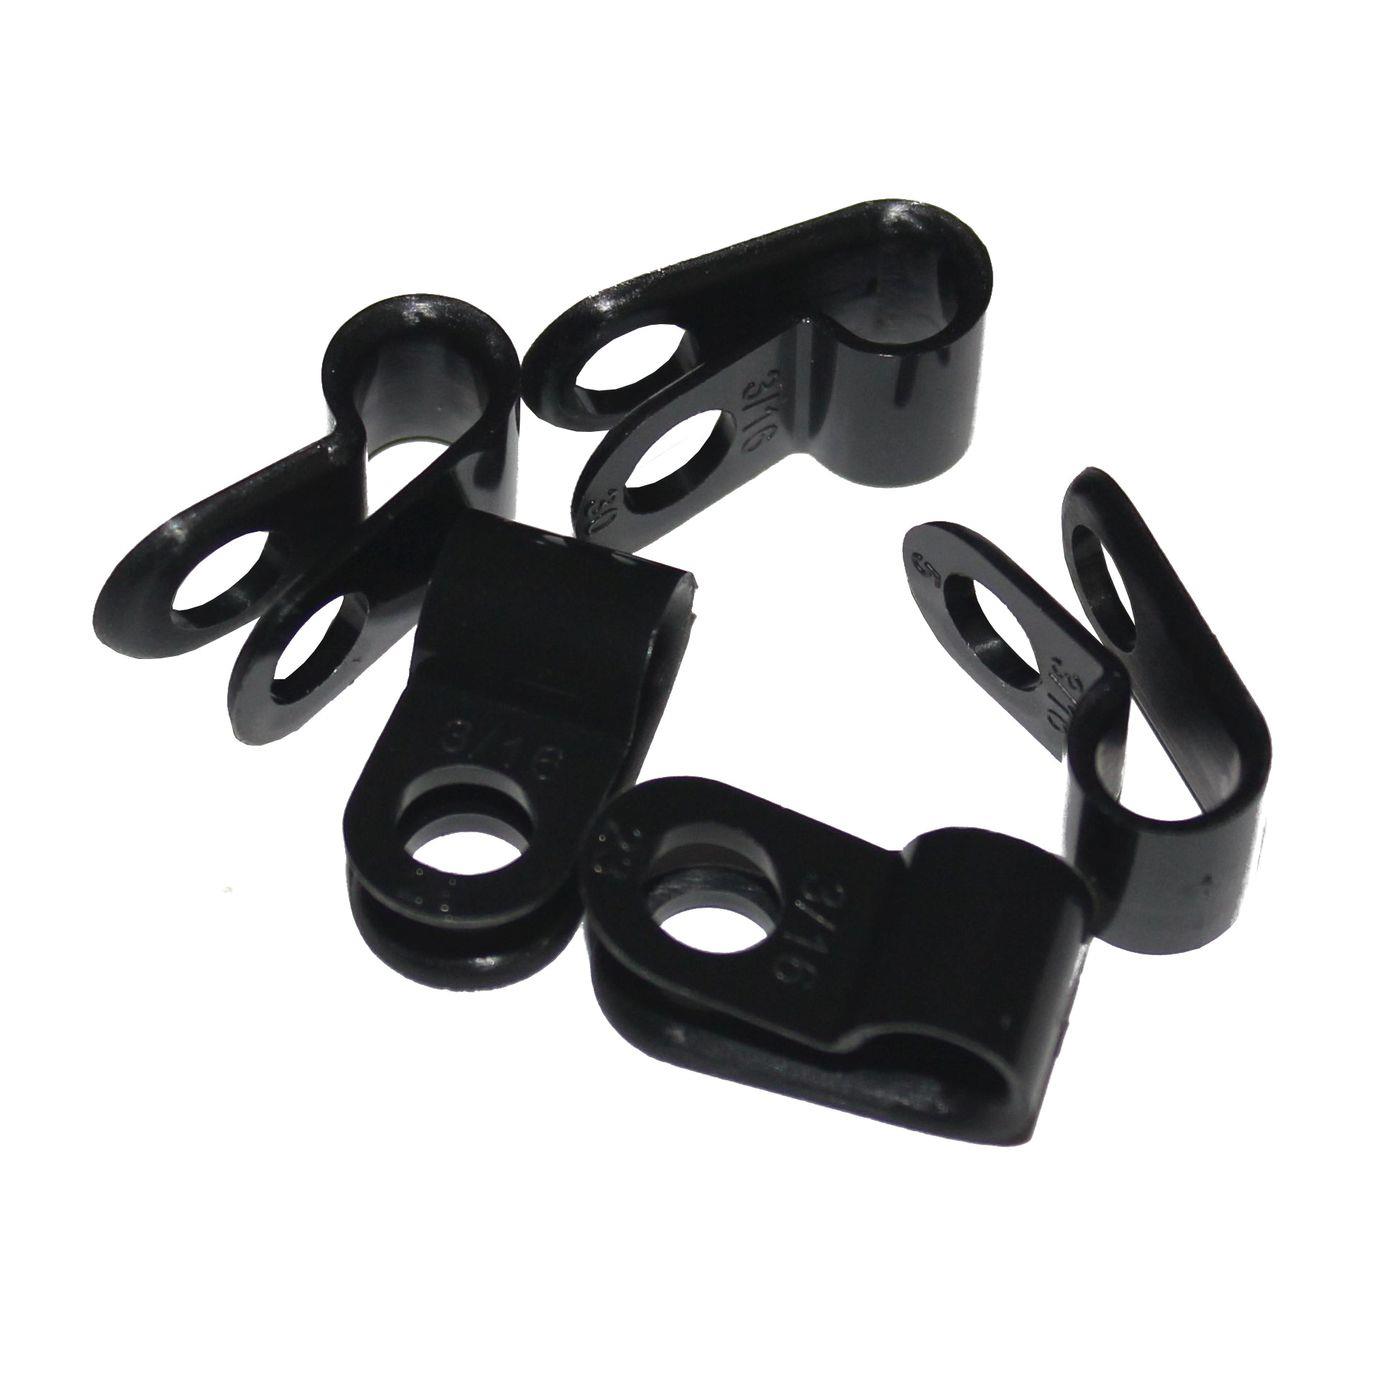 100x P-Clip for cable 5mm black Nylon Cable clamp Cable fixation Chassis clamps